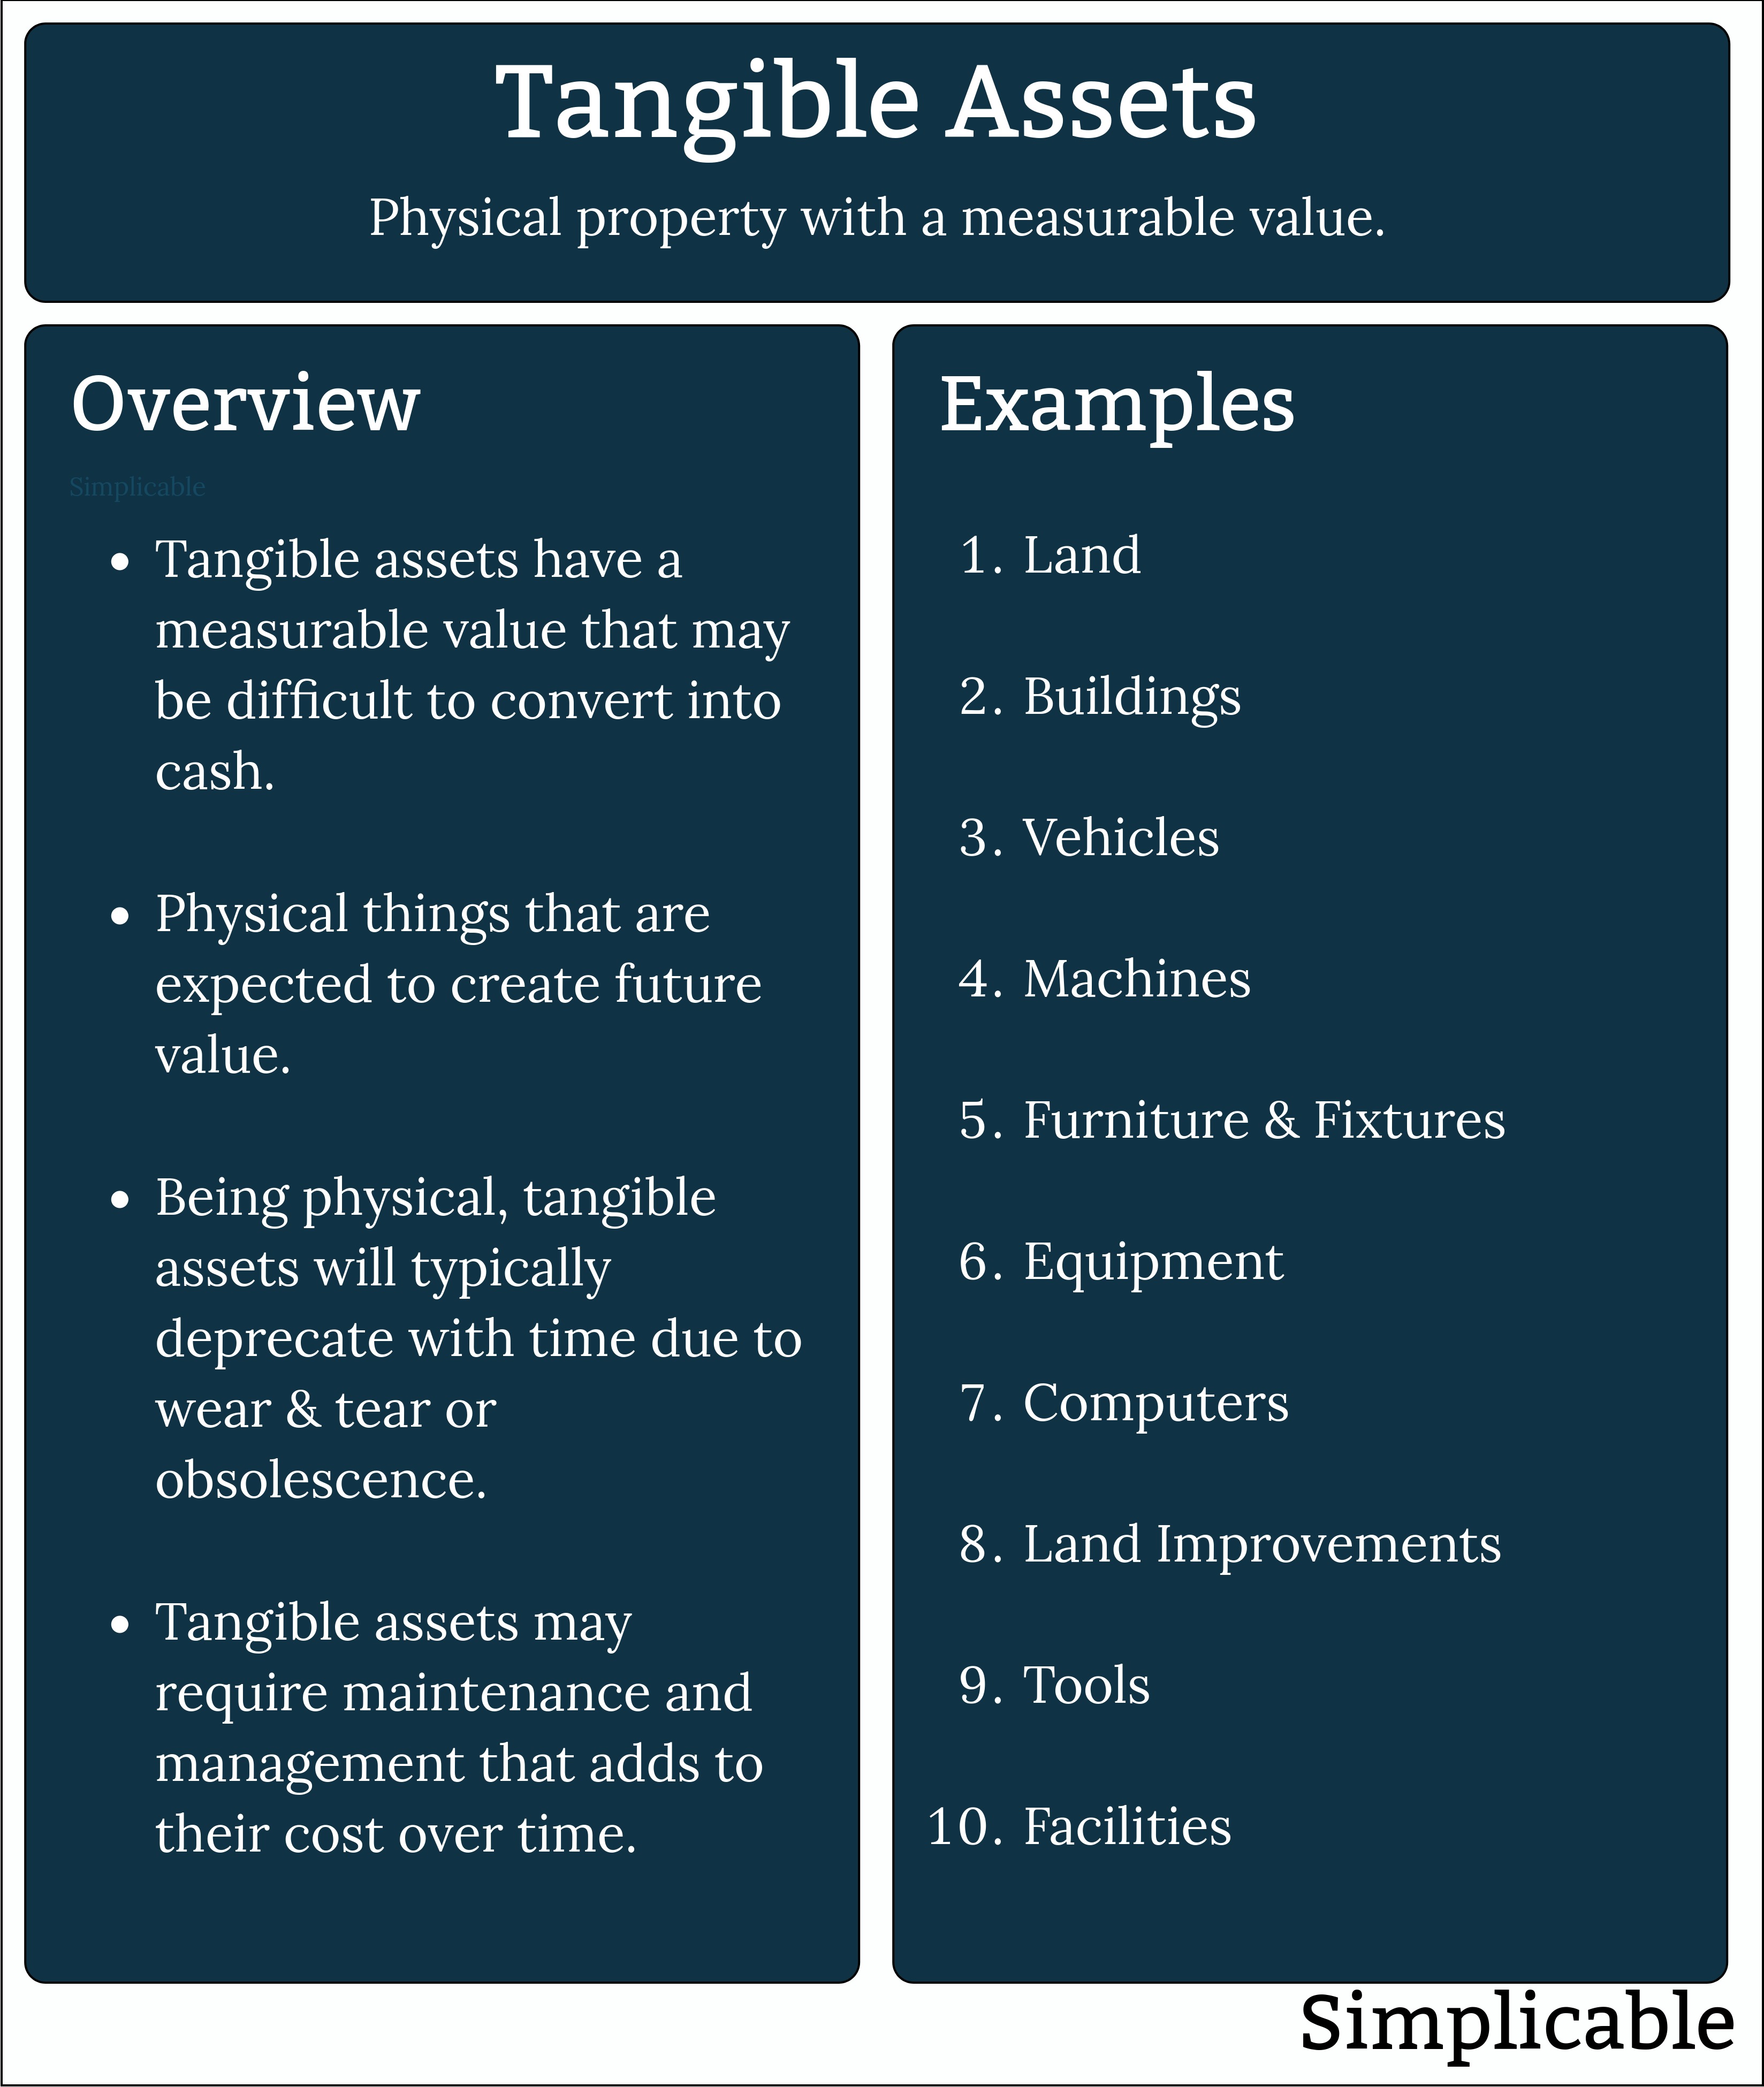 tangible assets overview and examples